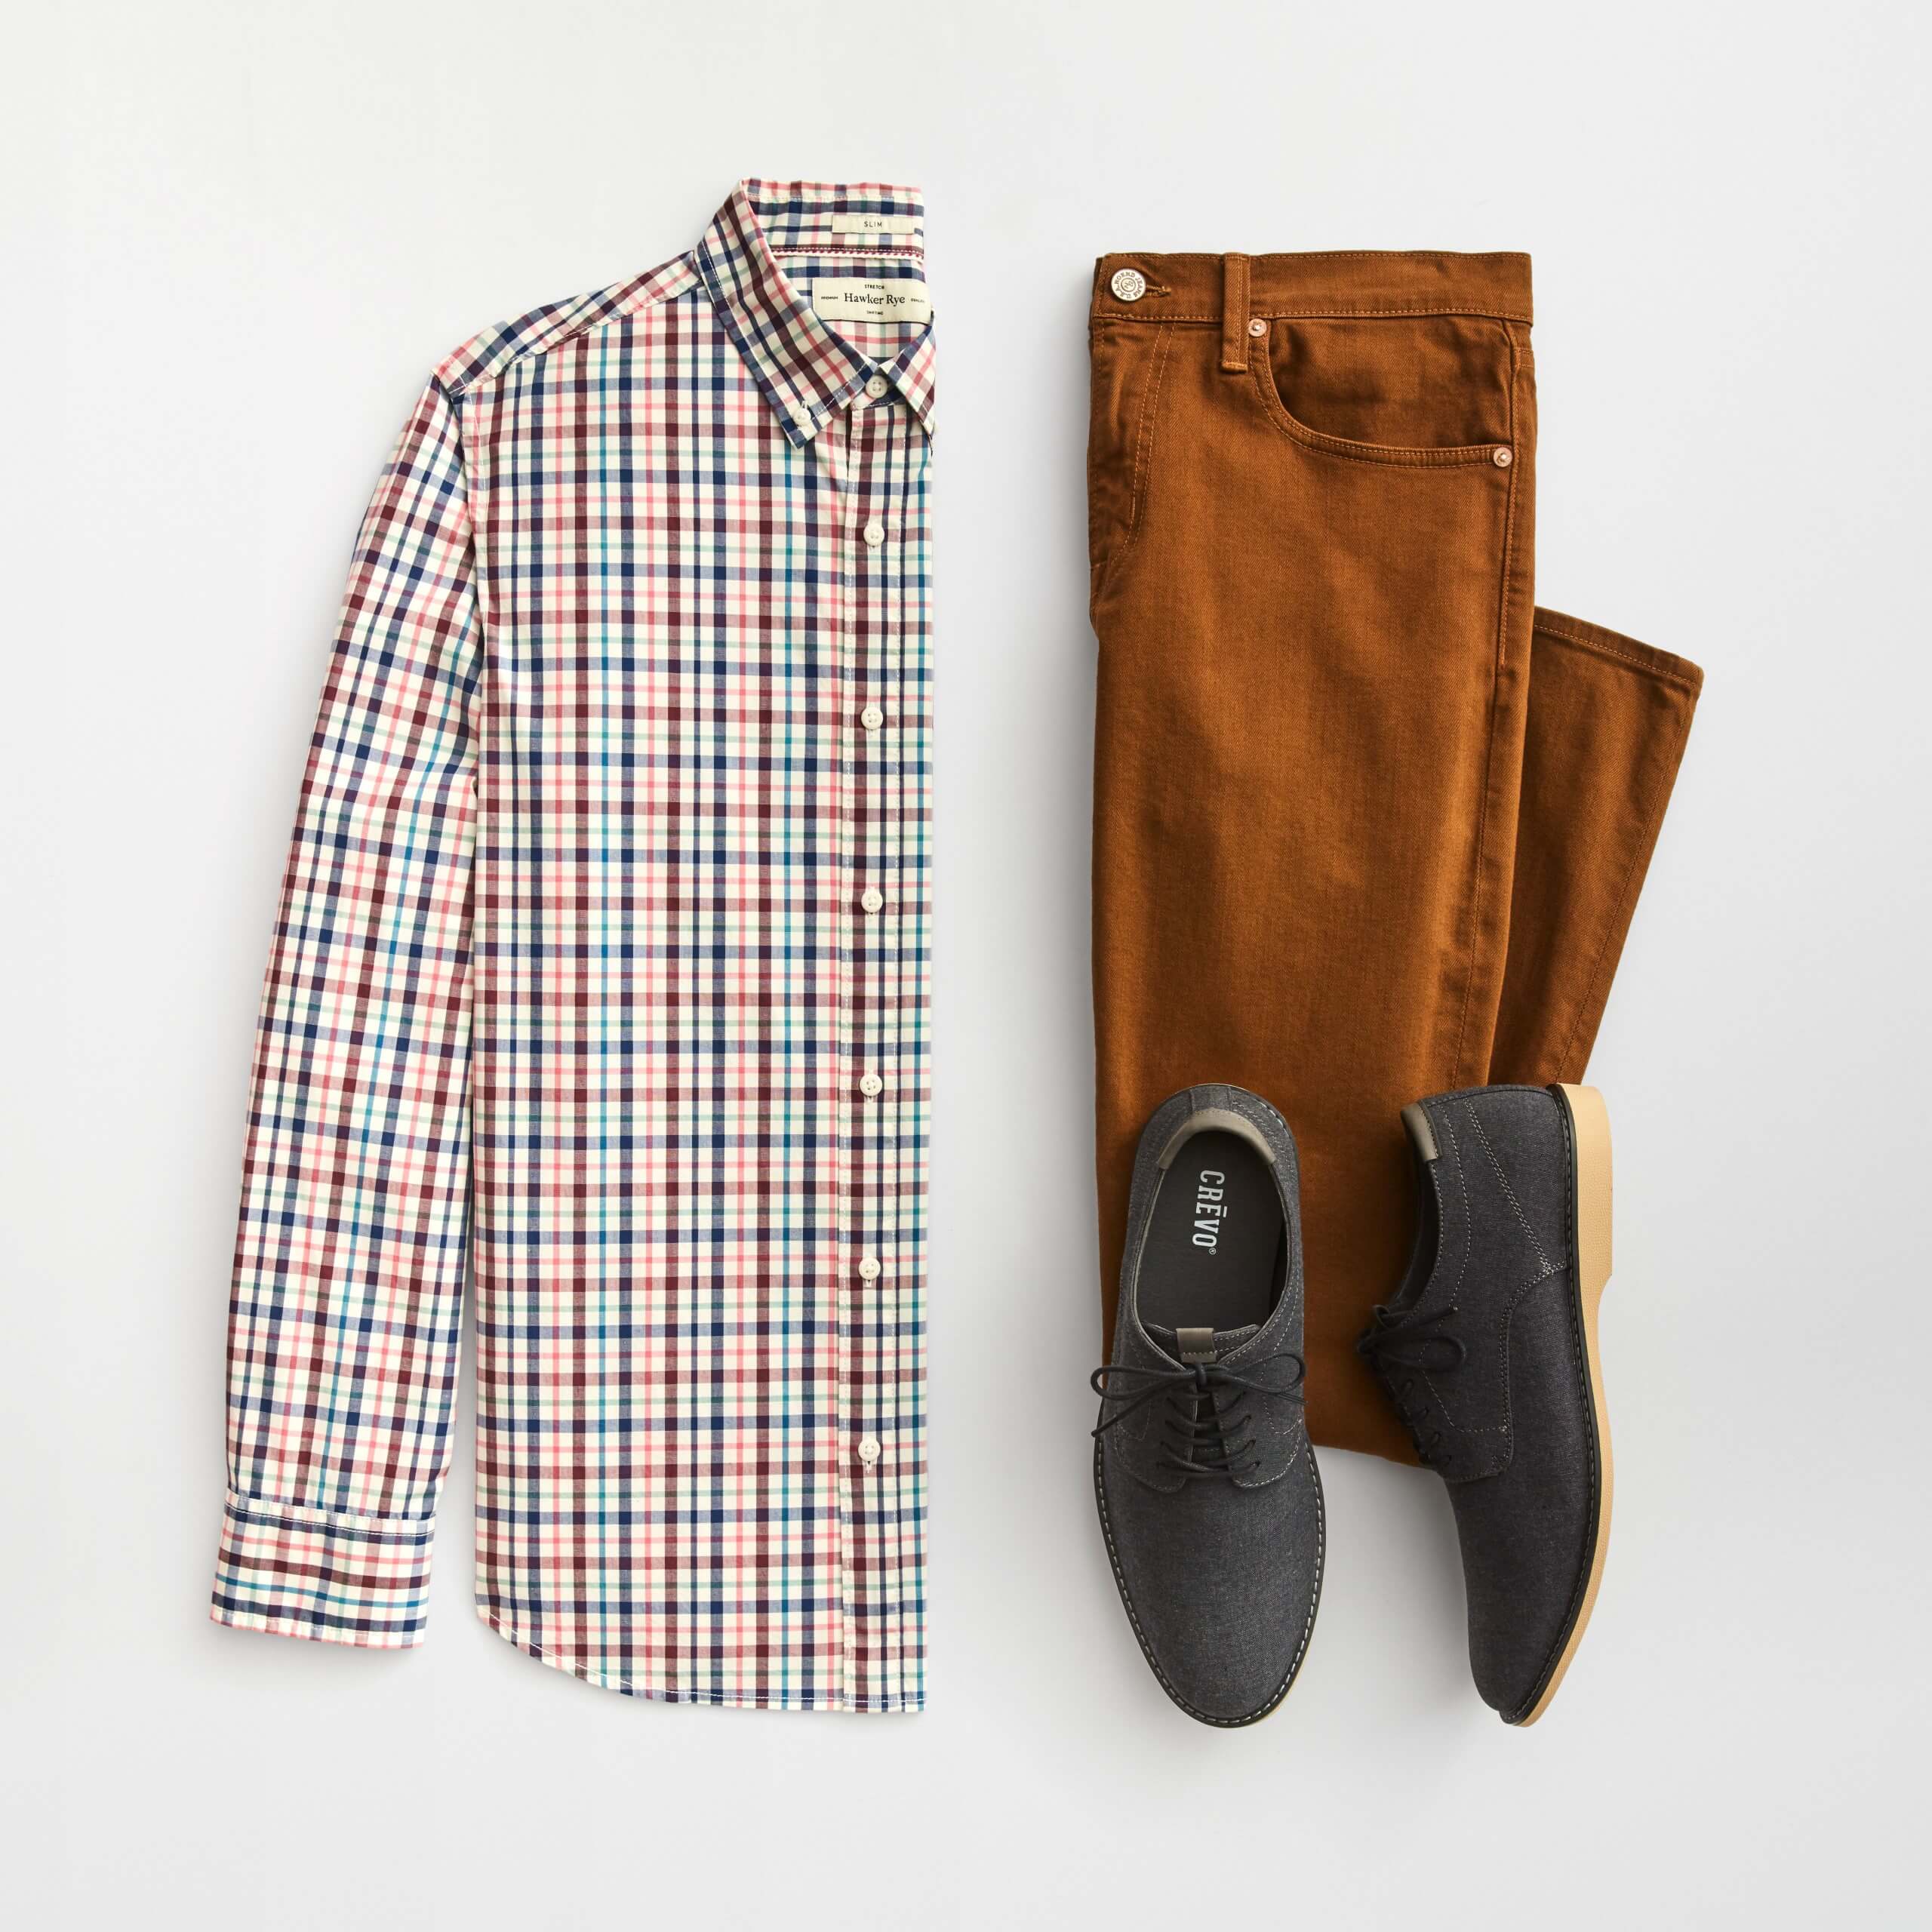 What to Wear on a First Date - Best Date Outfits for Men